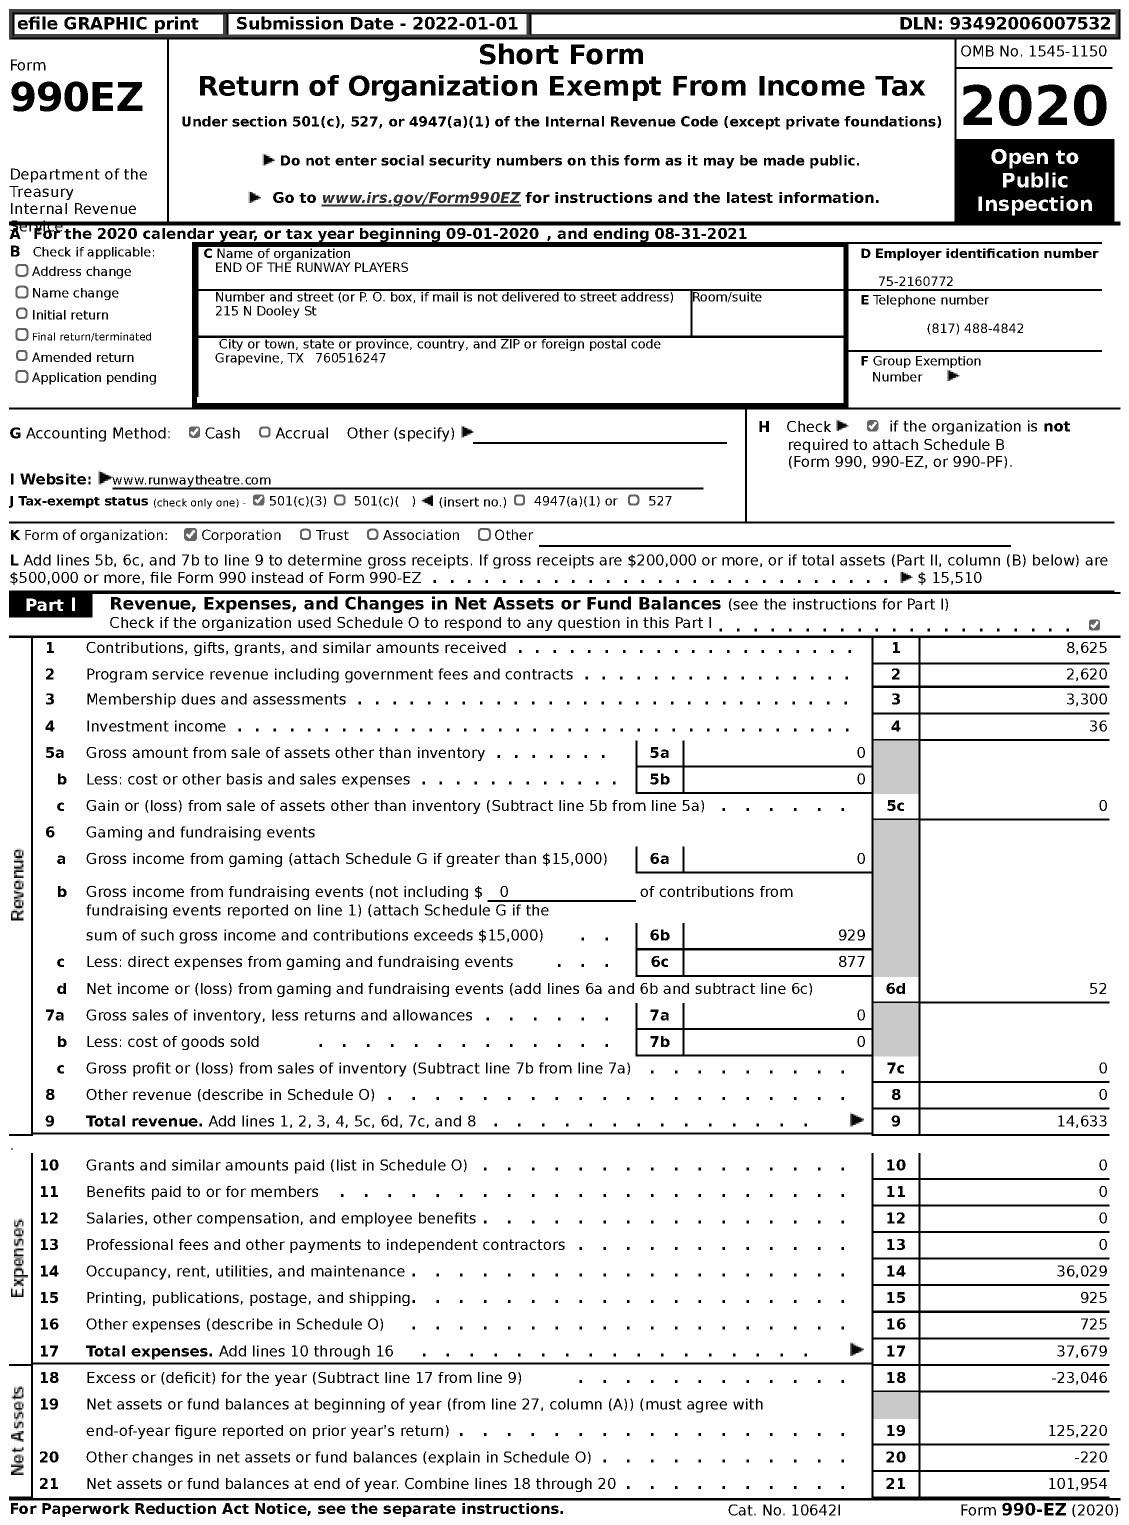 Image of first page of 2020 Form 990EZ for End of the Runway Players